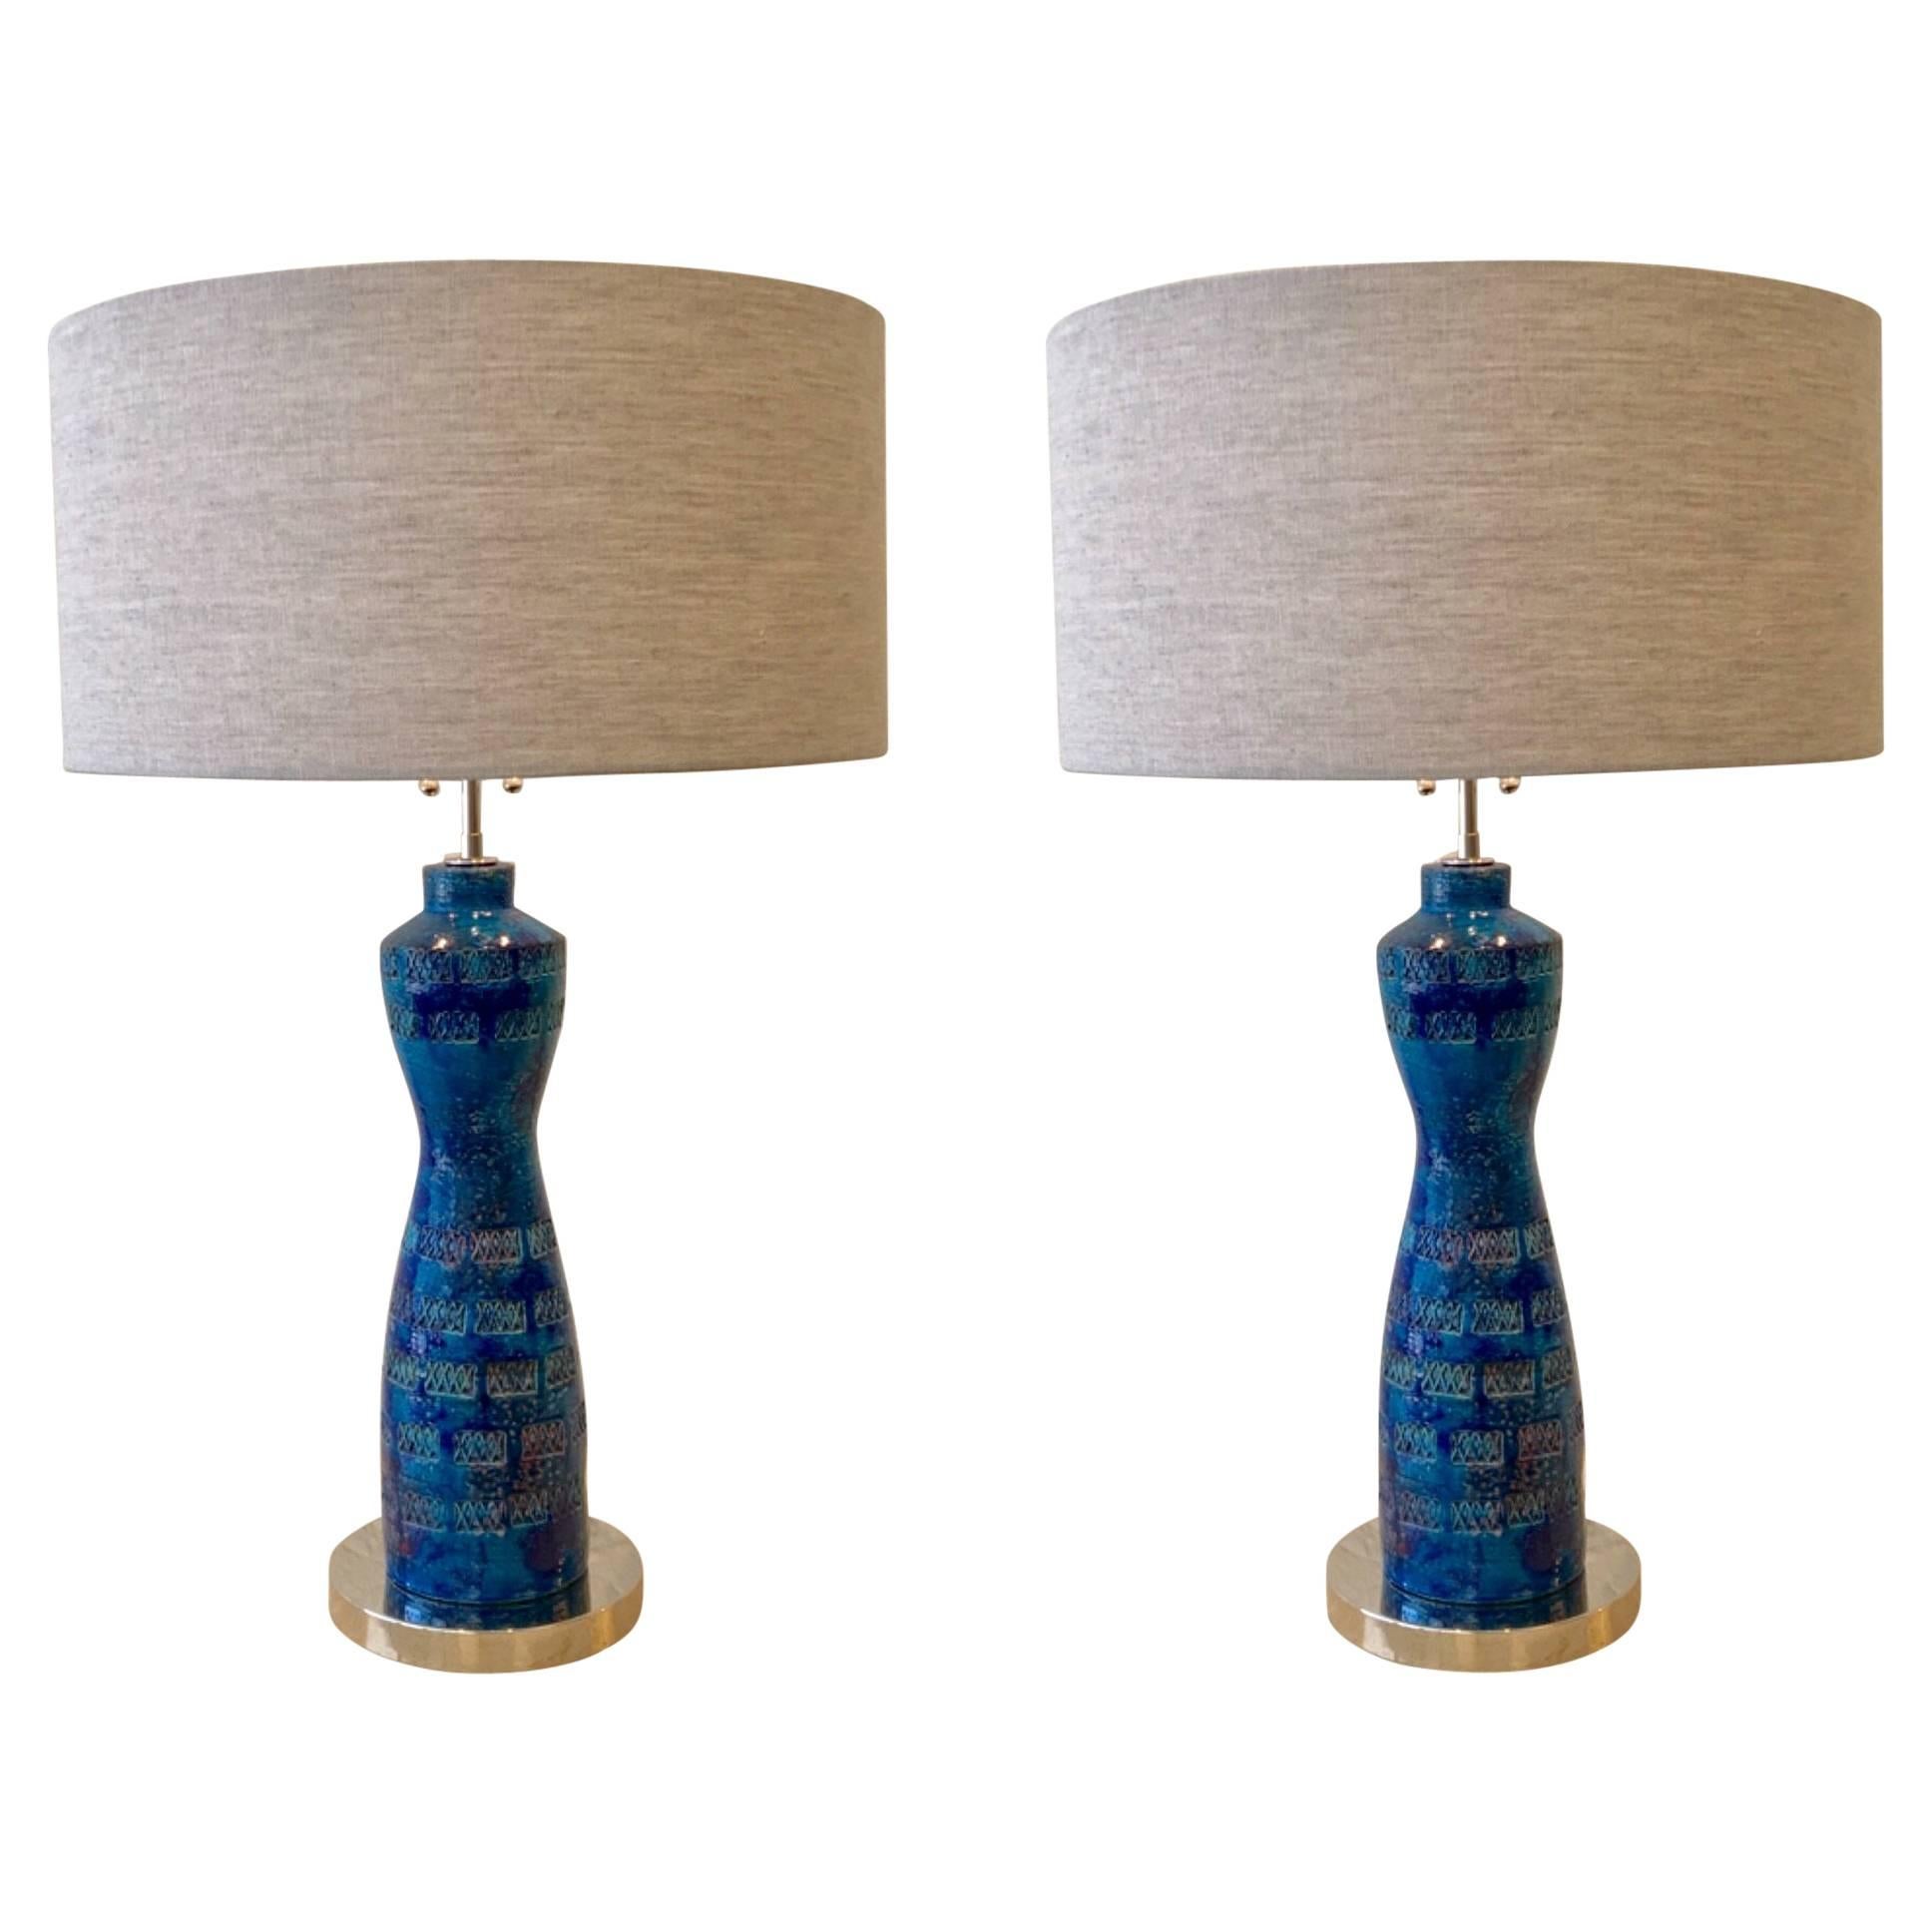 Pair of Italian Glazed Ceramic "Rimini Blue" and Nickel Table Lamps by Bitossi